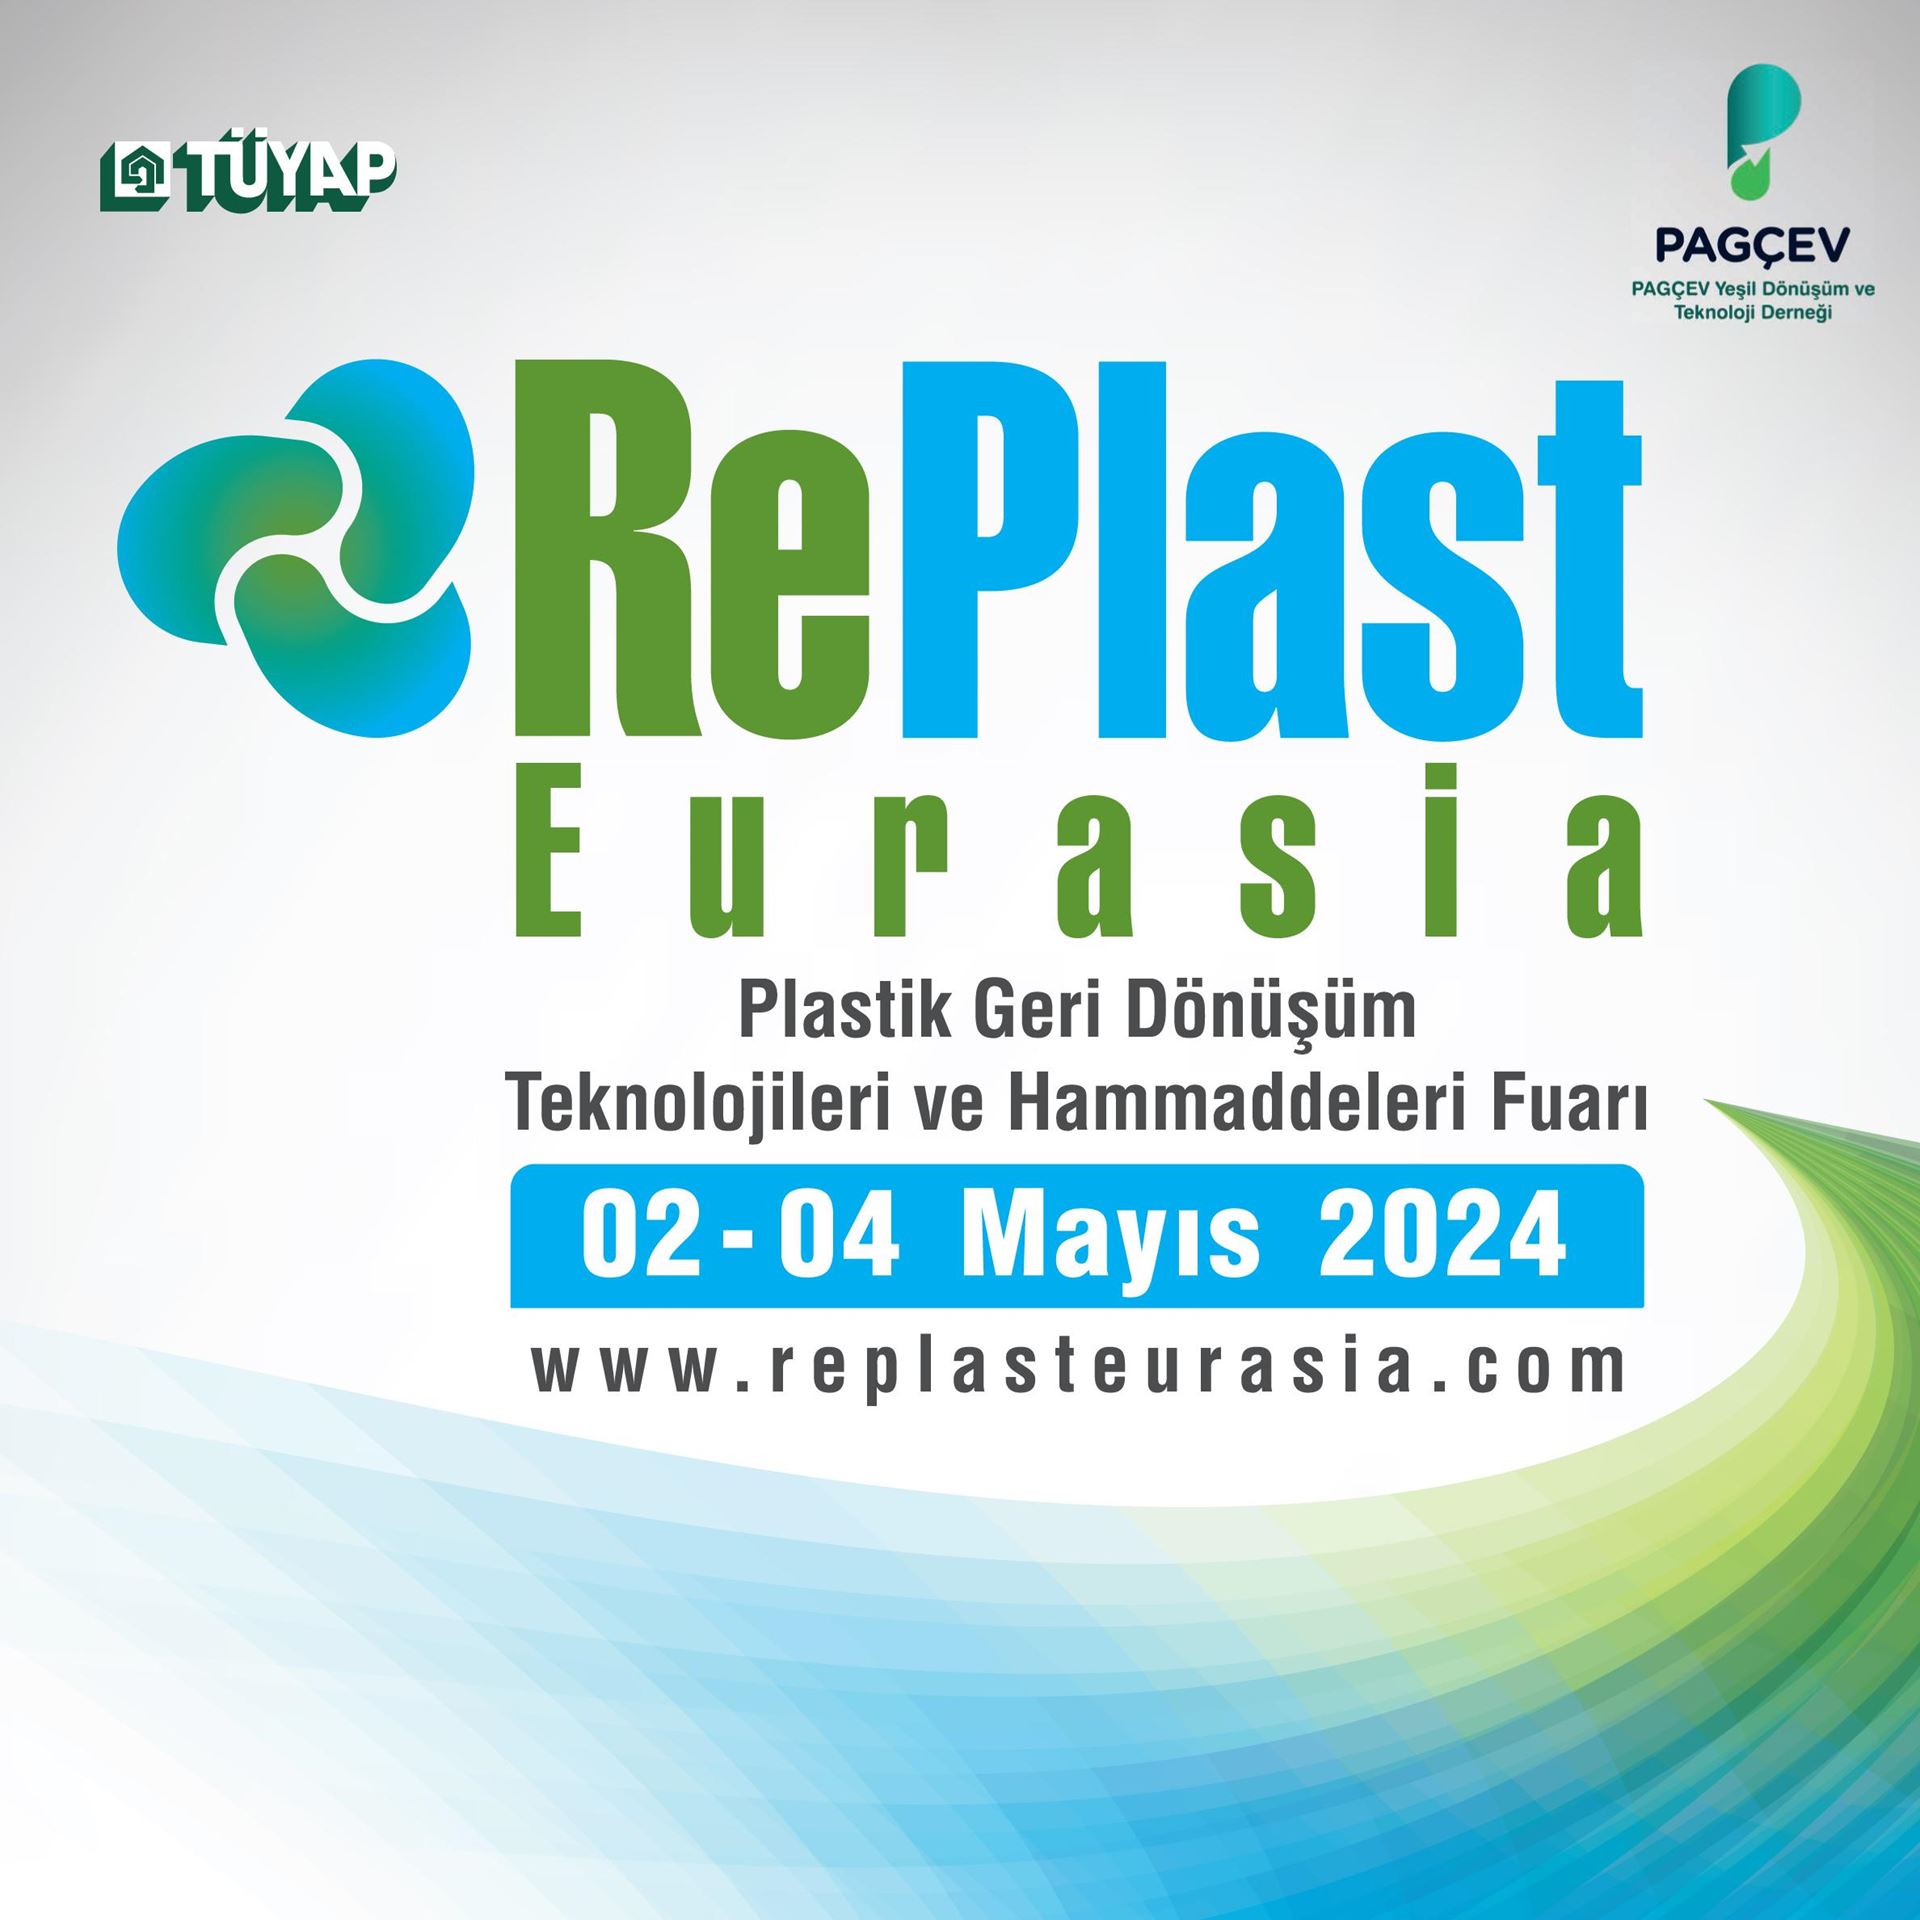 RePlast Eurasia will take place at Tüyap on May 2-4, 2024